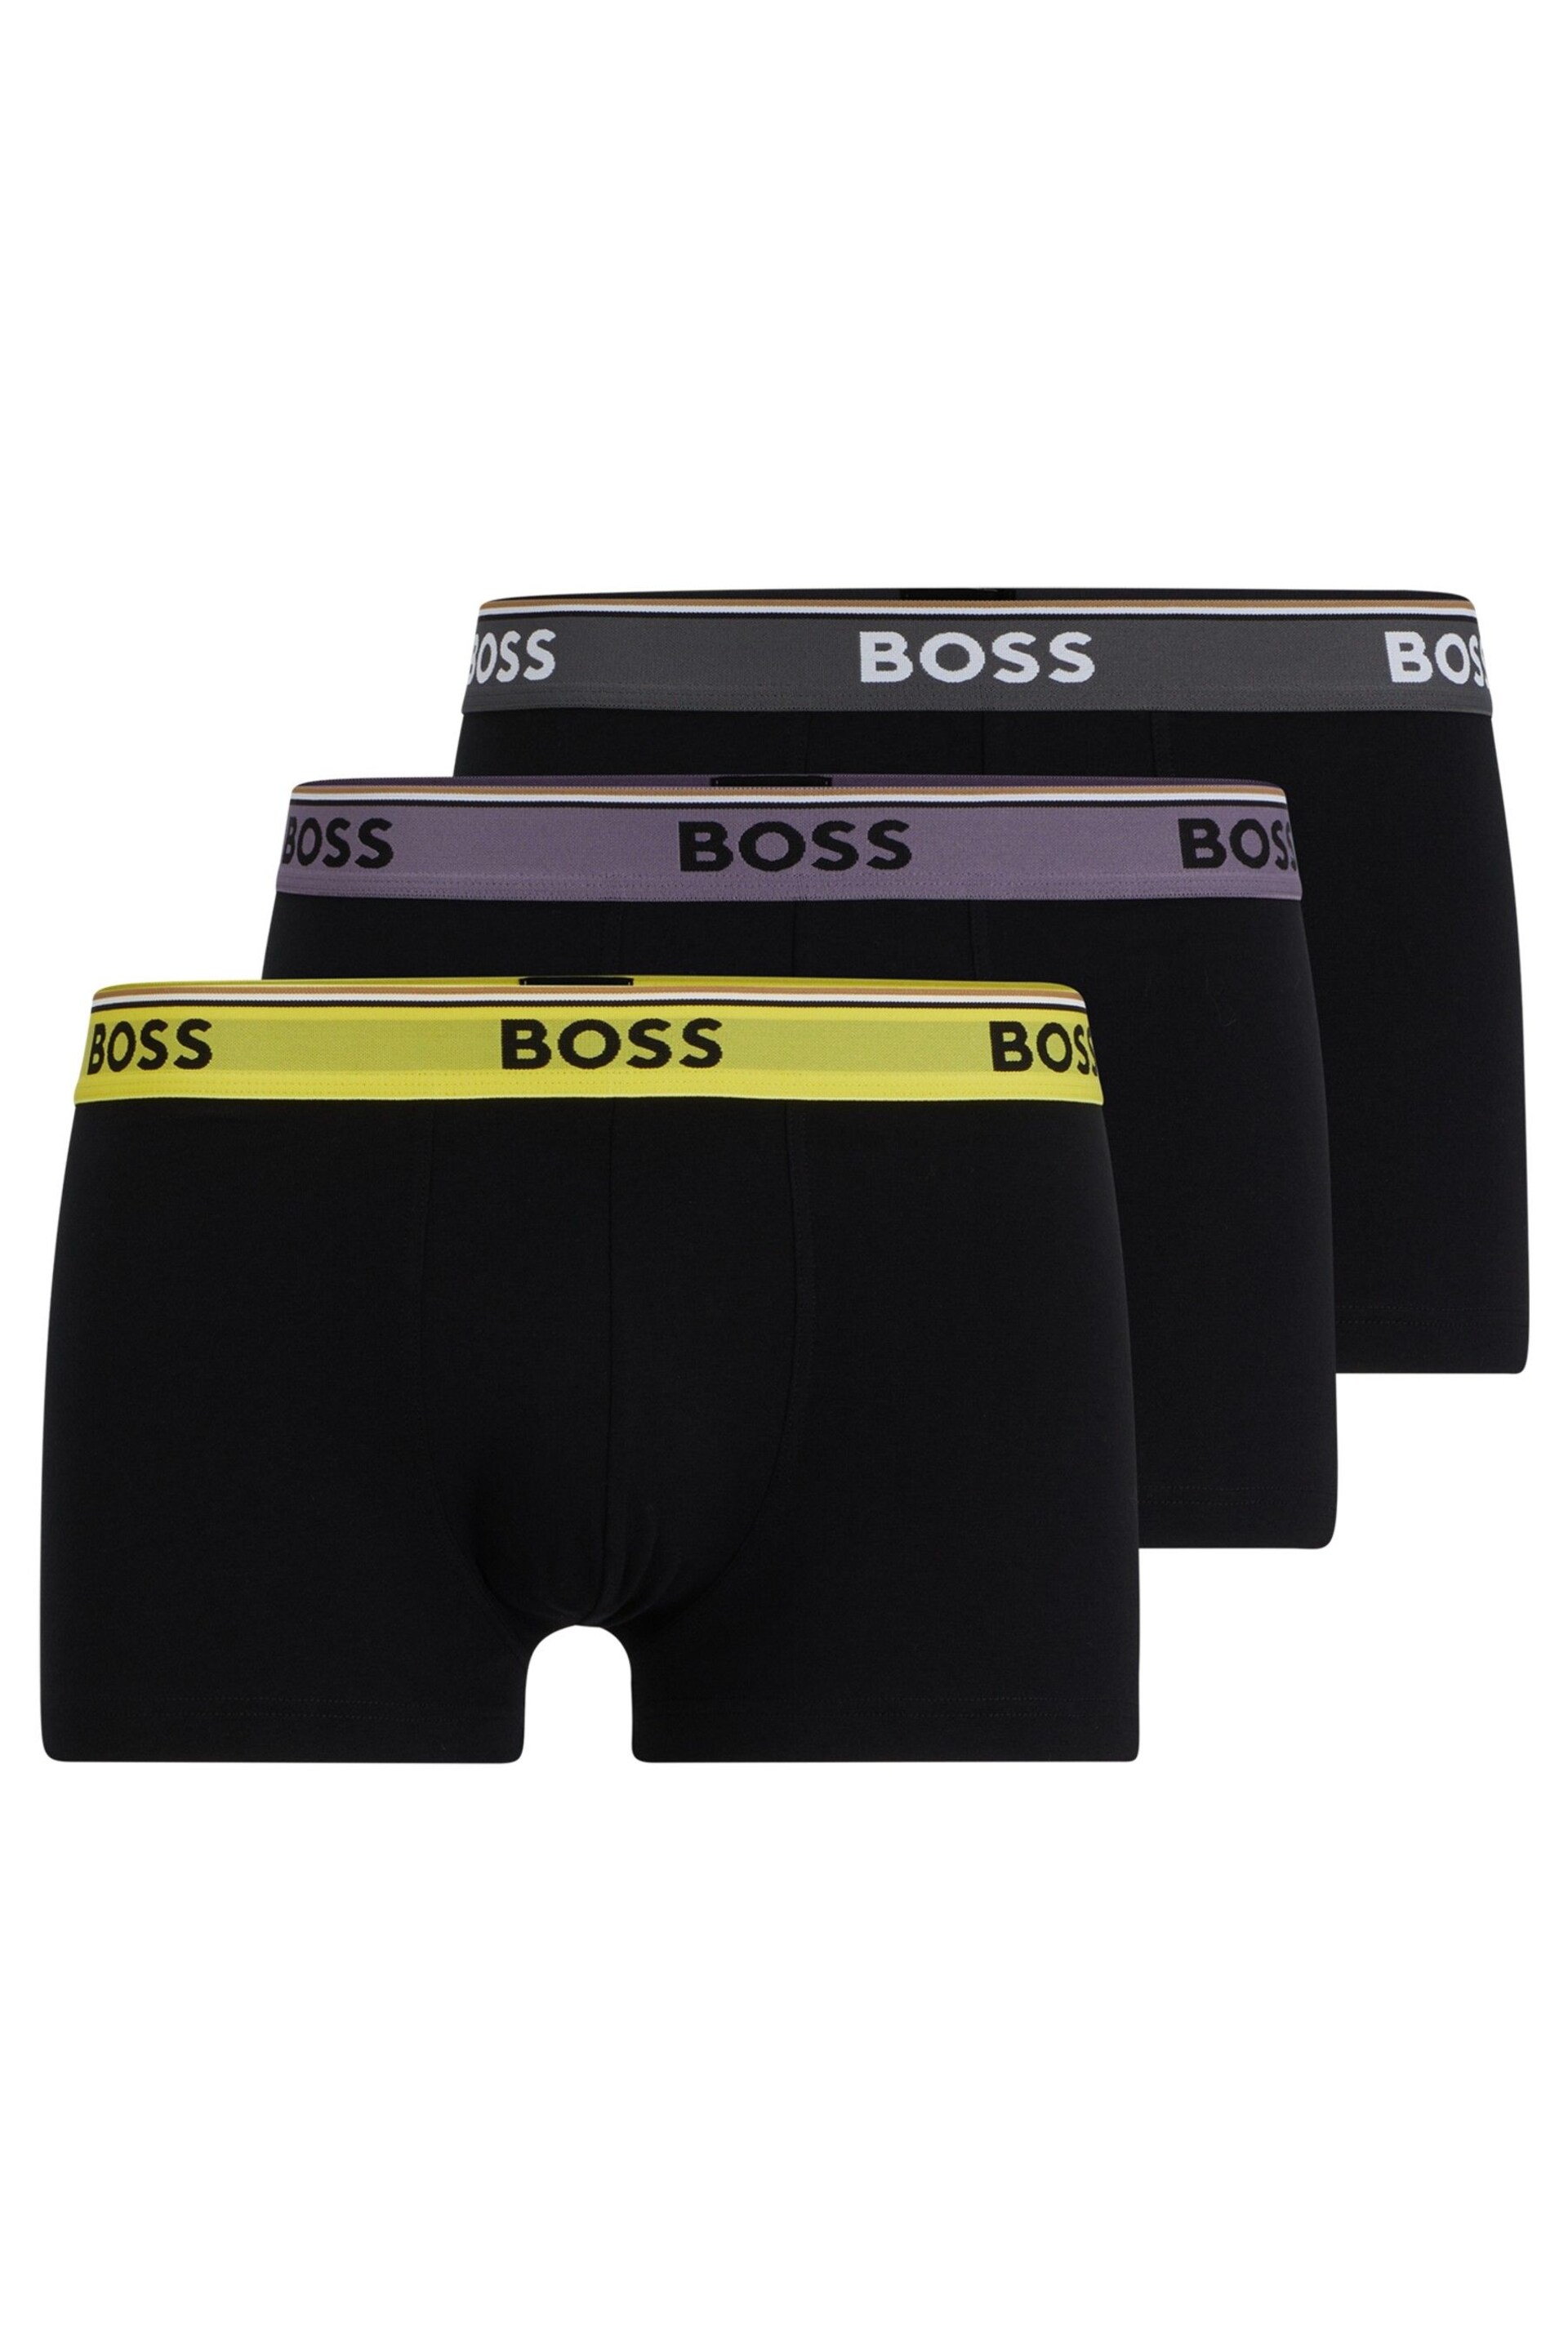 BOSS Black/Grey Three-Pack of Stretch-Cotton Trunks With Logo Waistbands - Image 1 of 6